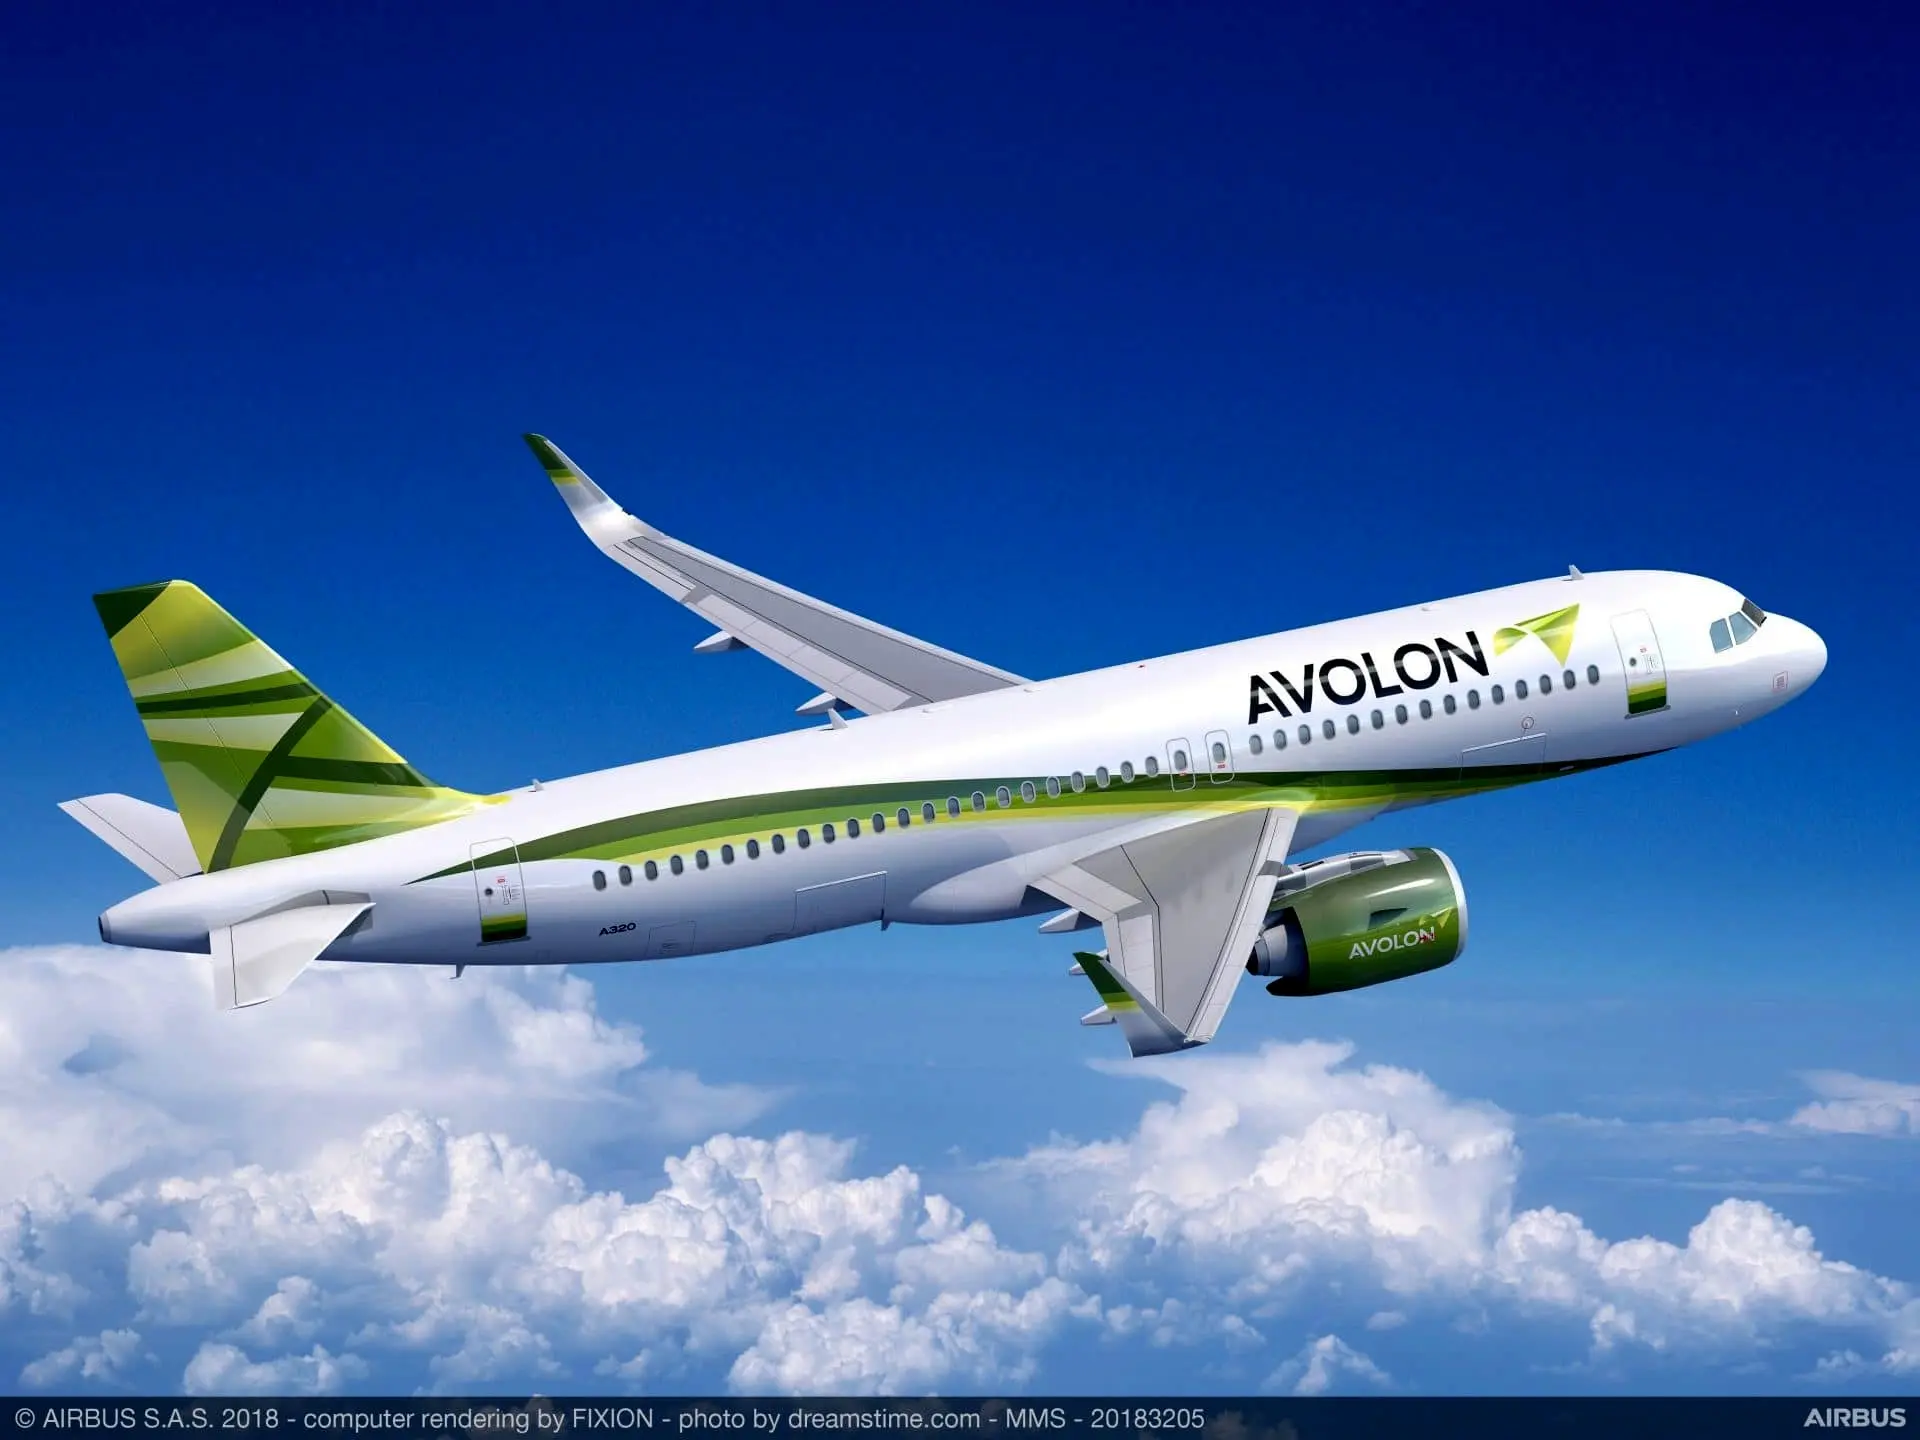 Avolon firms up order for 100 Airbus A320neo Family aircraft